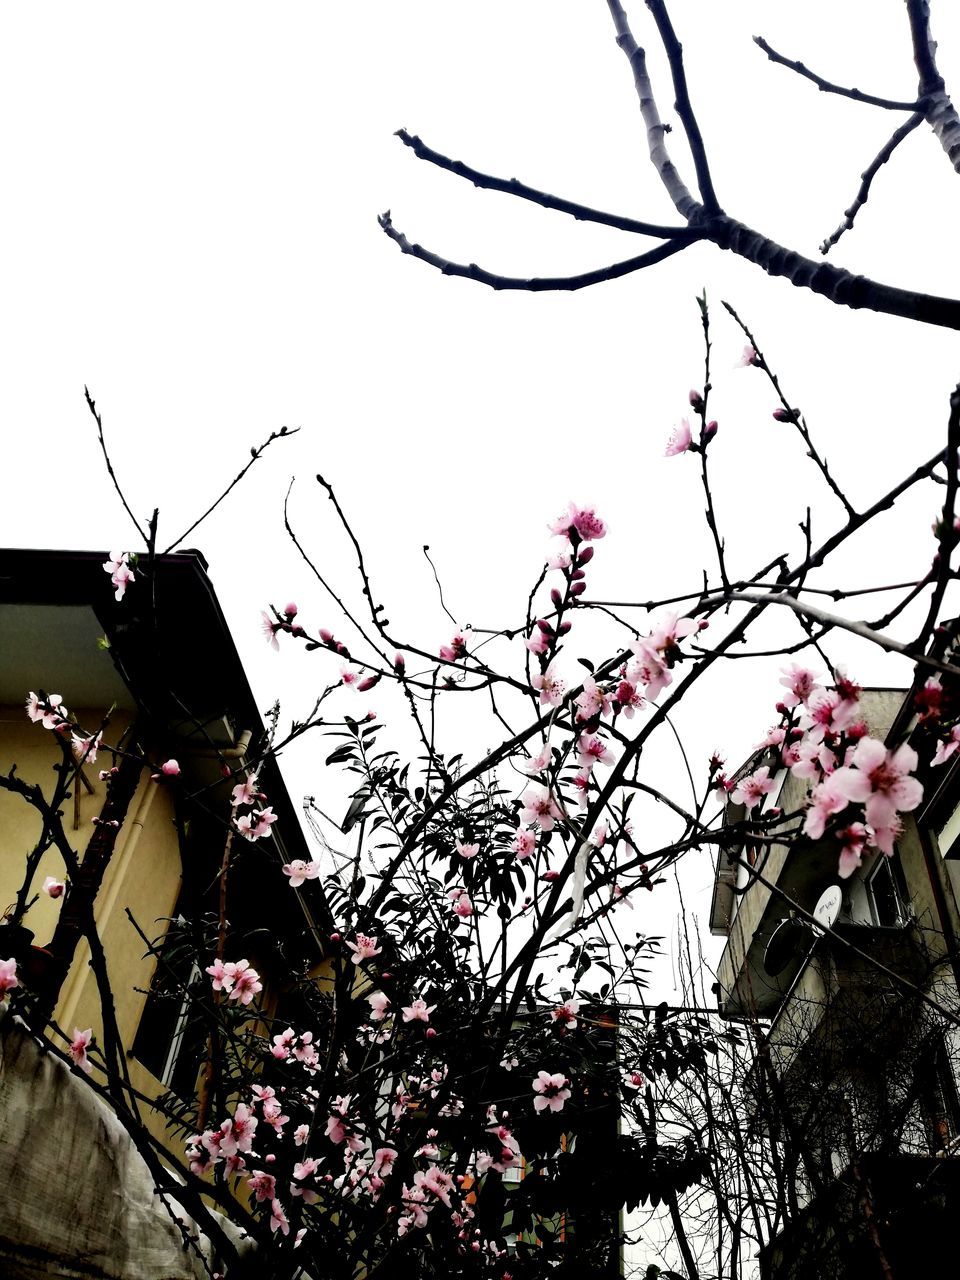 plant, flowering plant, flower, growth, tree, nature, low angle view, sky, fragility, branch, freshness, no people, beauty in nature, pink color, day, vulnerability, built structure, blossom, building exterior, architecture, outdoors, springtime, cherry blossom